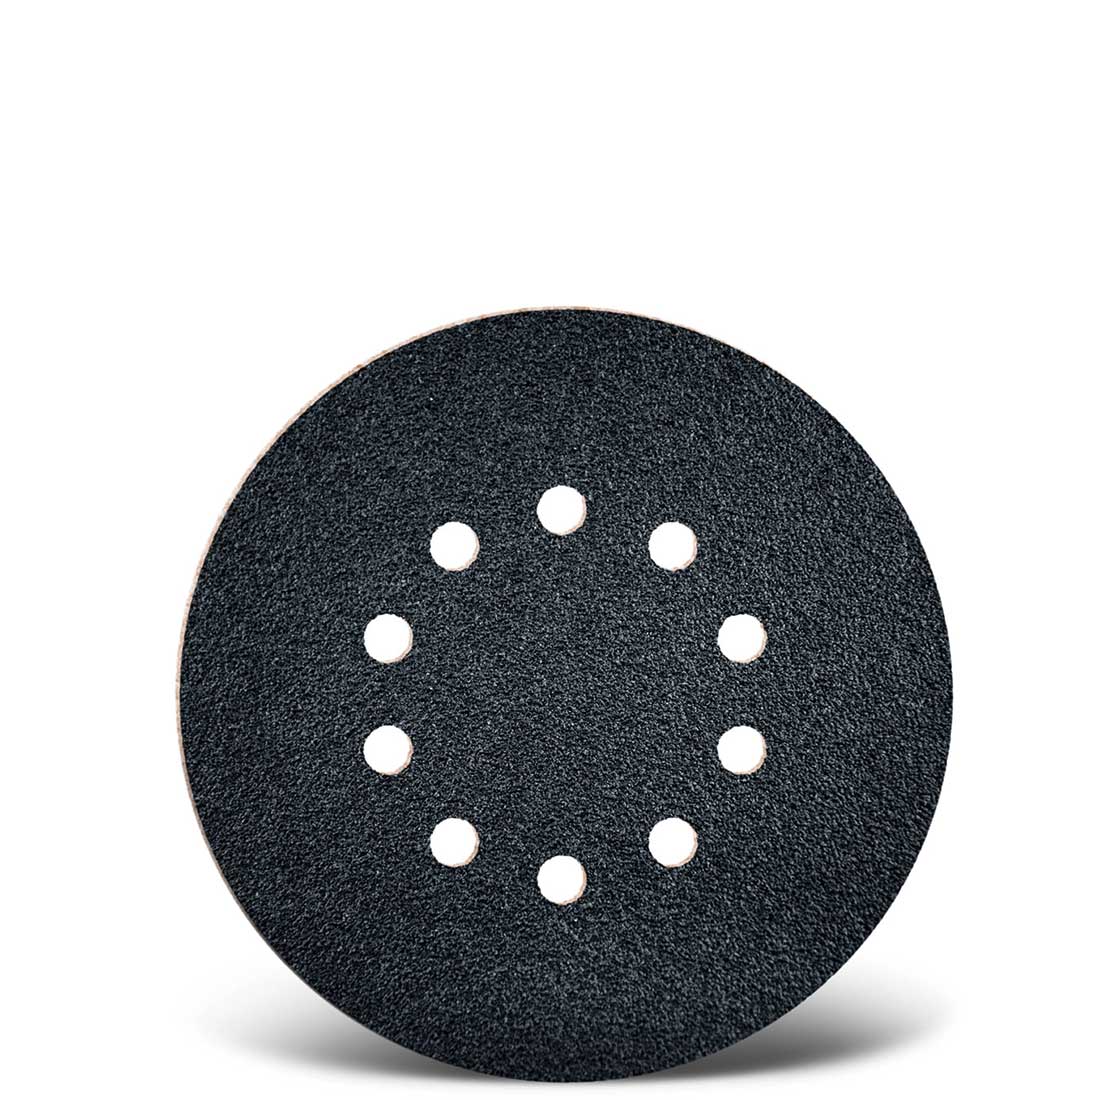 MENZER hook & loop sanding discs for drywall sanders, G16, Ø 225 mm / 10 hole / silicon carbide